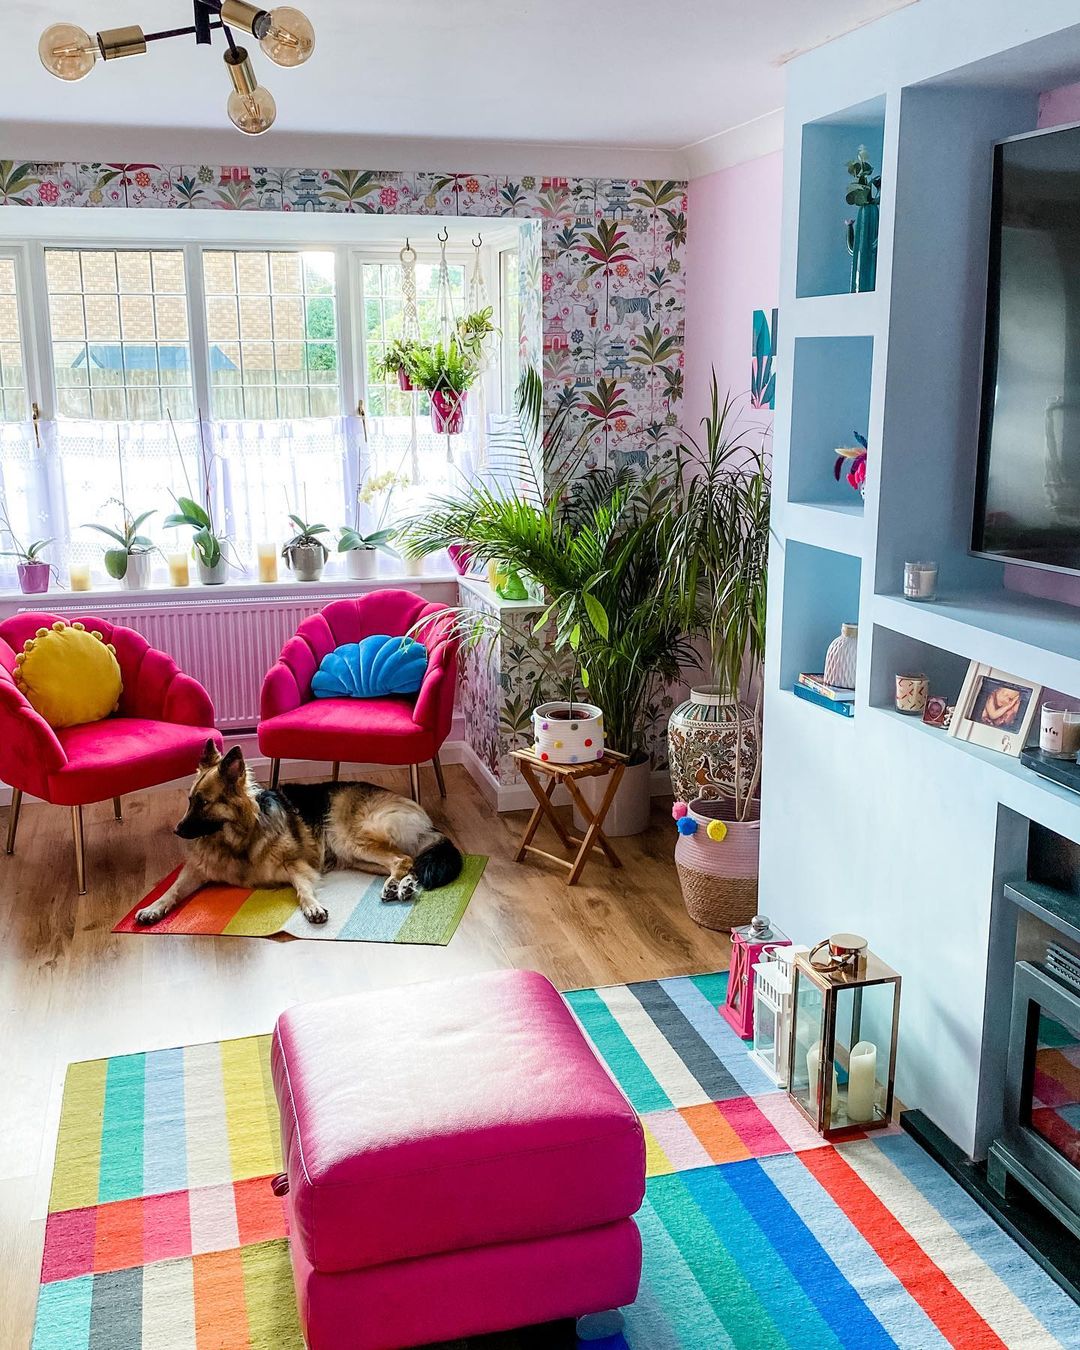 Bright-colored living room with maximalism style. Photo by Instagram User @reka_thornton_home